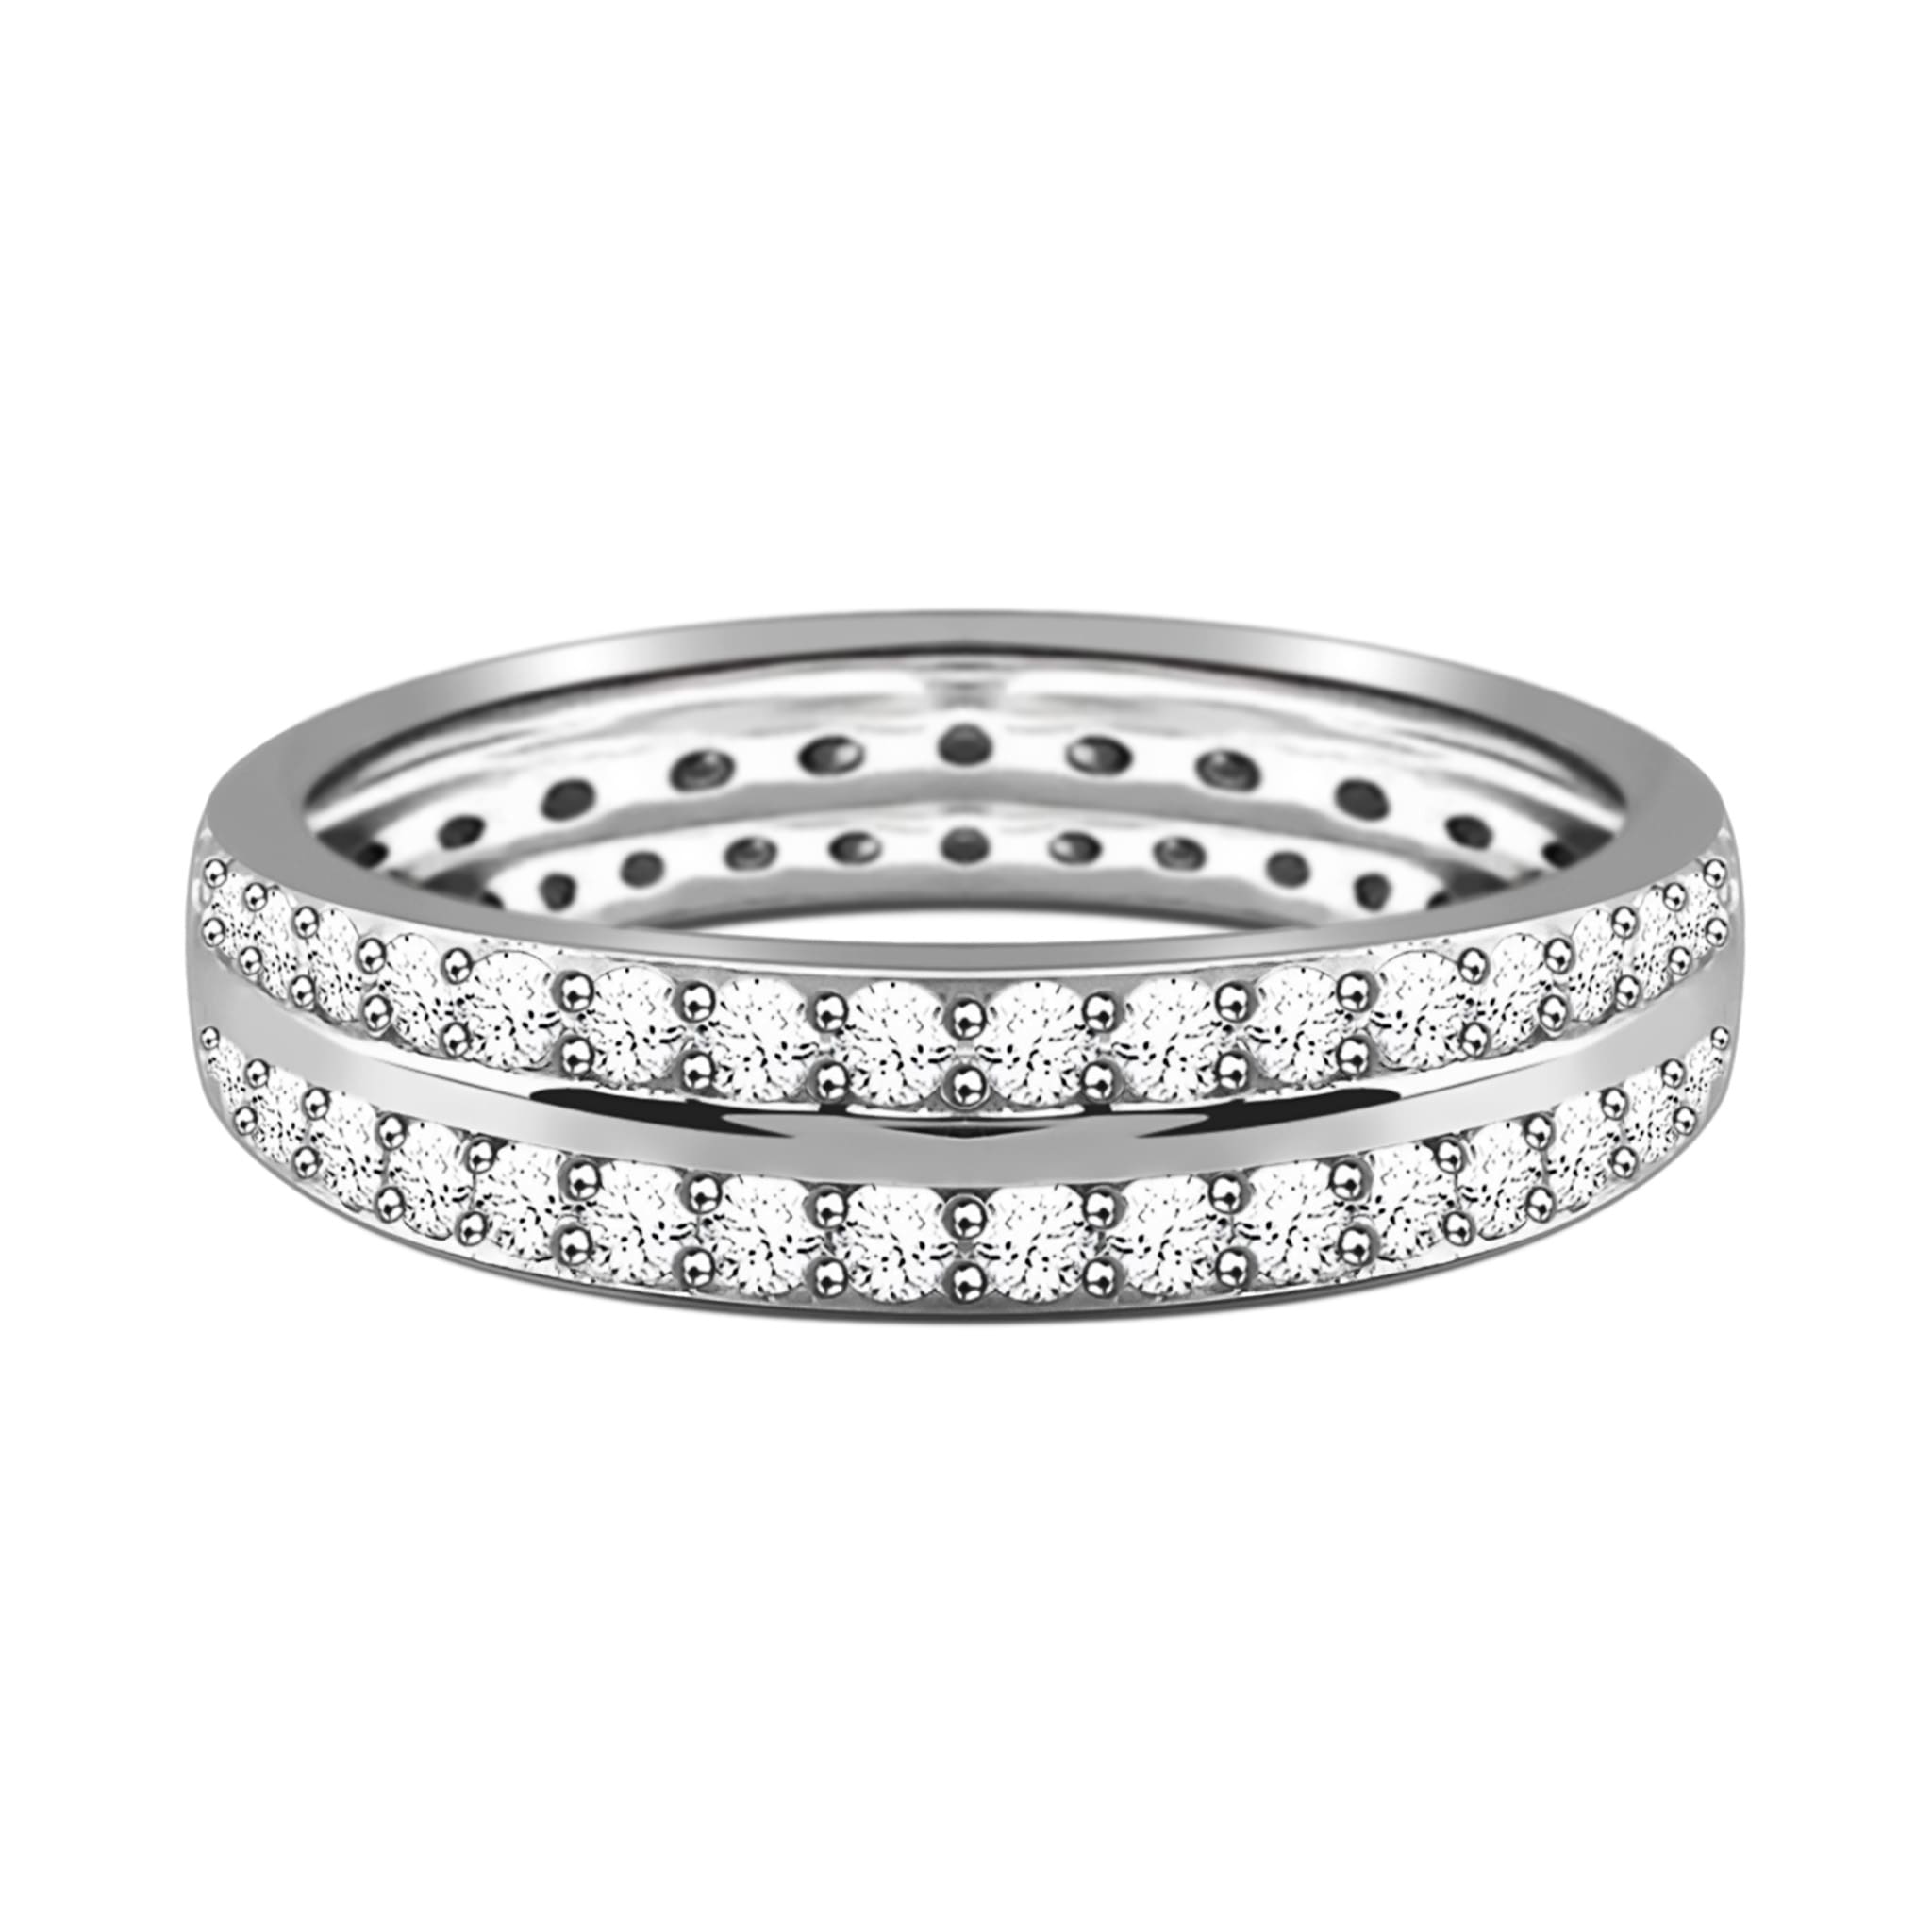 Aesthetic White Zirconia Sterling Silver Twins Destiny Pave Ring